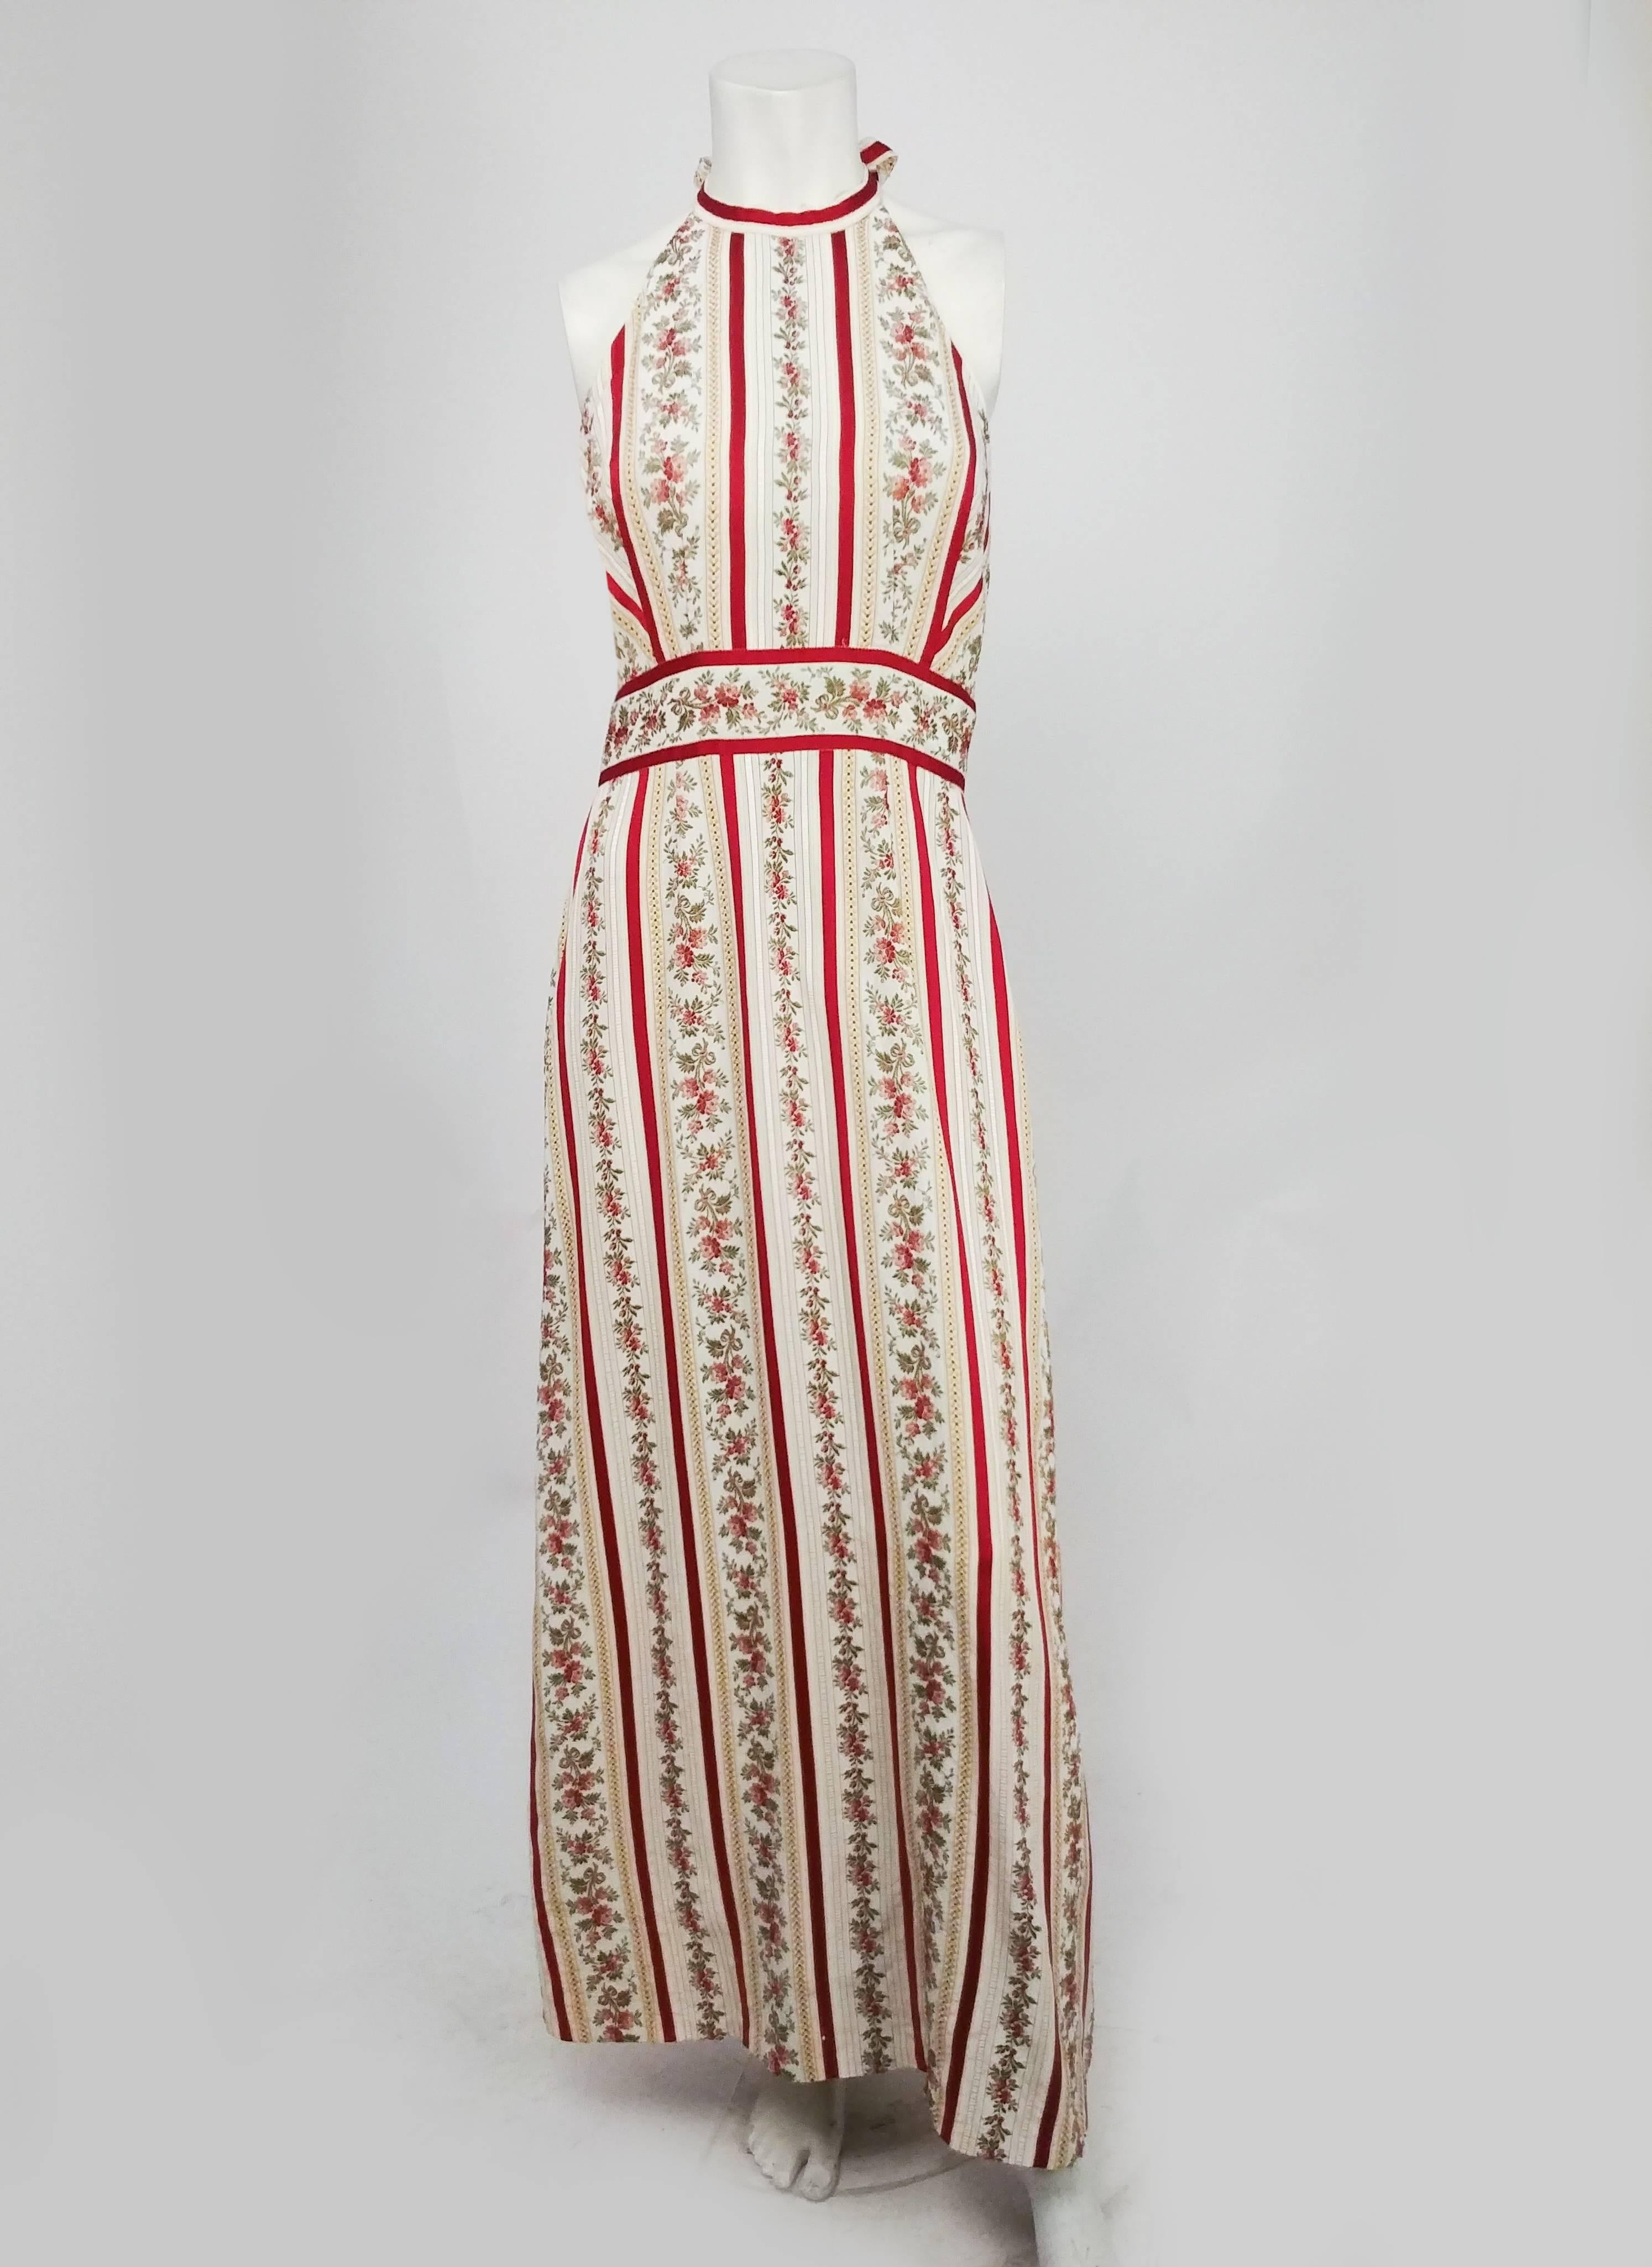 1970s Boho Backless Maxi Halter Dress. Striped floral and ribbon fabric, zips up back. 